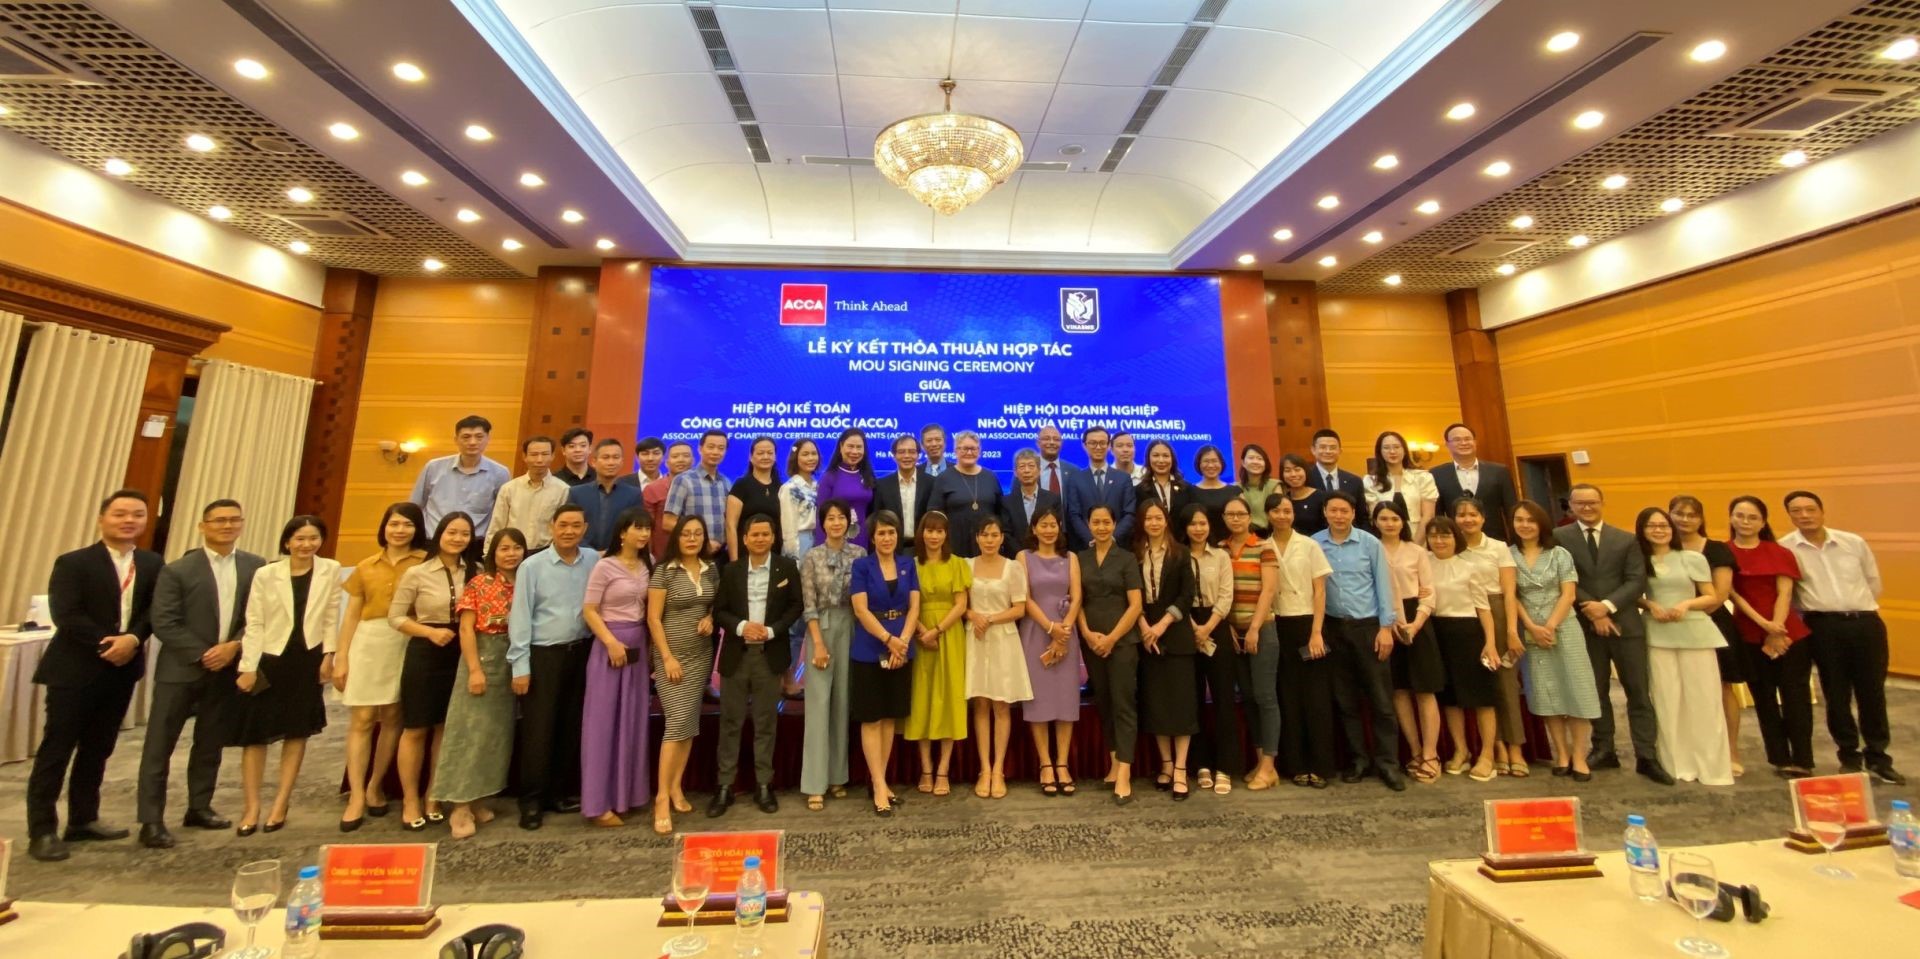 The representative of the Vietnam Association of Small and Medium Enterprises (VINASME) took a photo with the Association of Chartered Certified Accountants (ACCA).